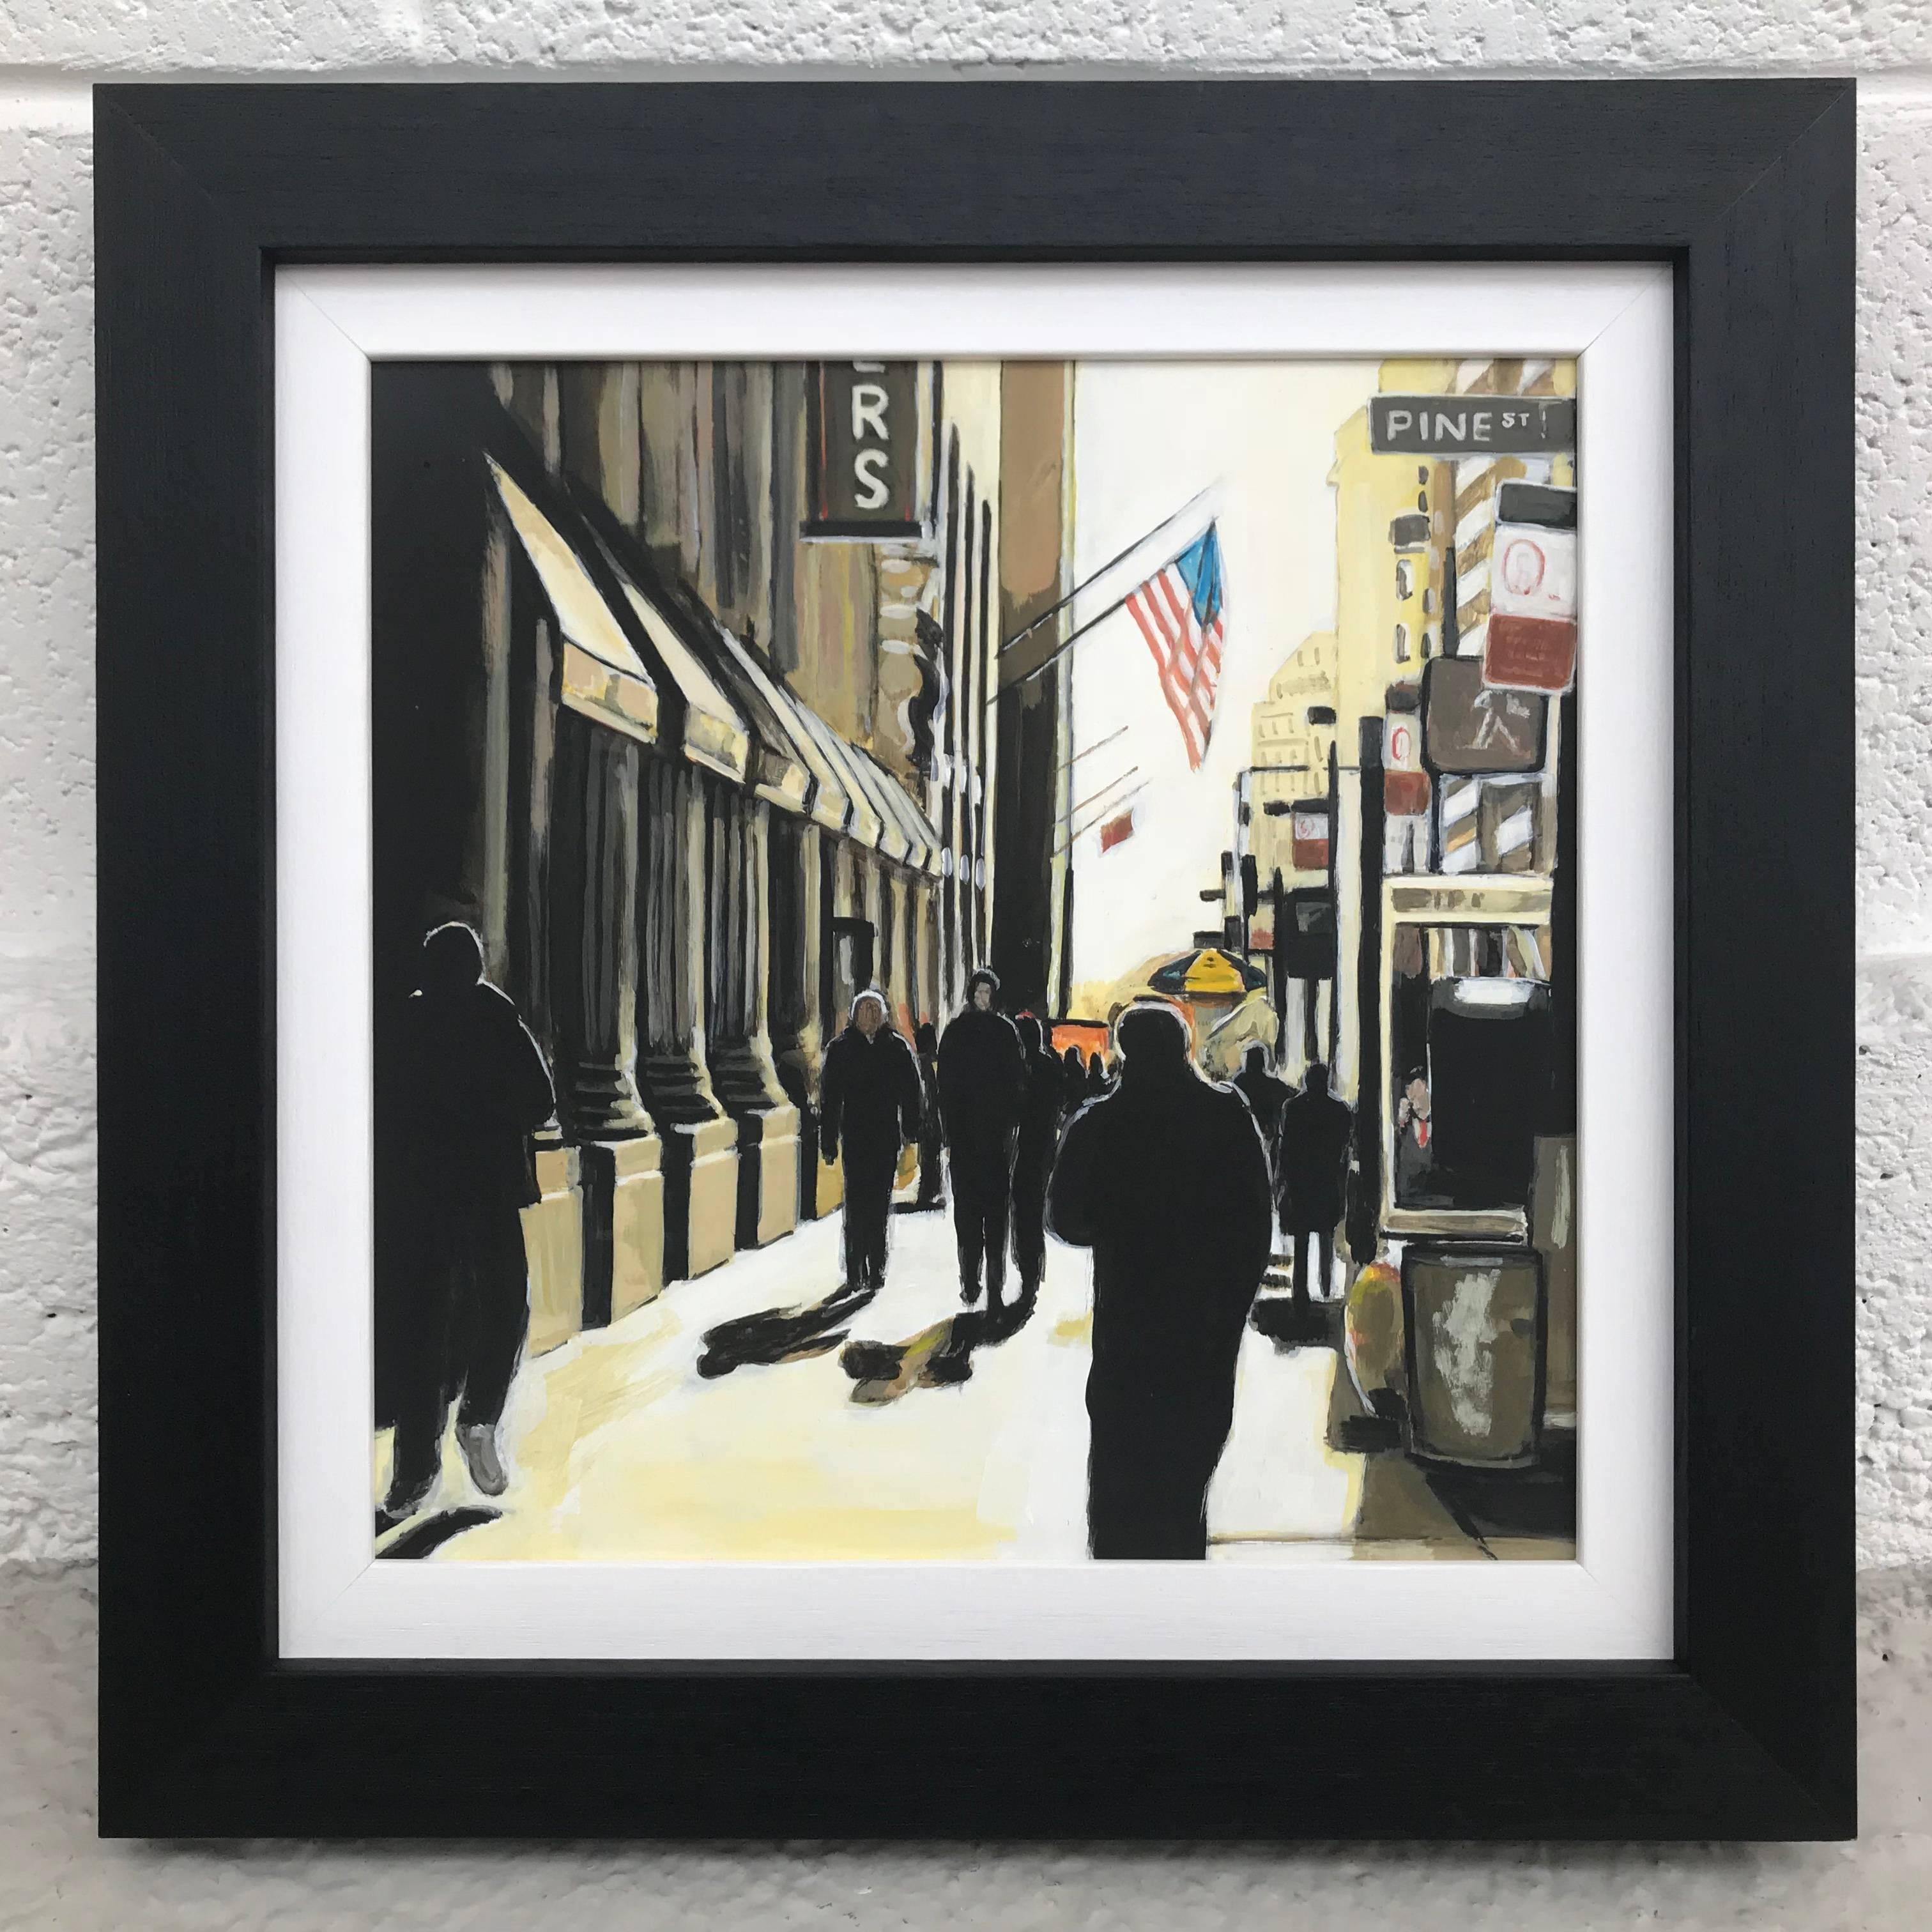 An original figurative and architectural painting of Pine Street in the New York Sunshine by Leading British Urban Artist, Angela Wakefield. Part of her New York Series.

The character of New York’s skyline and large residential districts is often